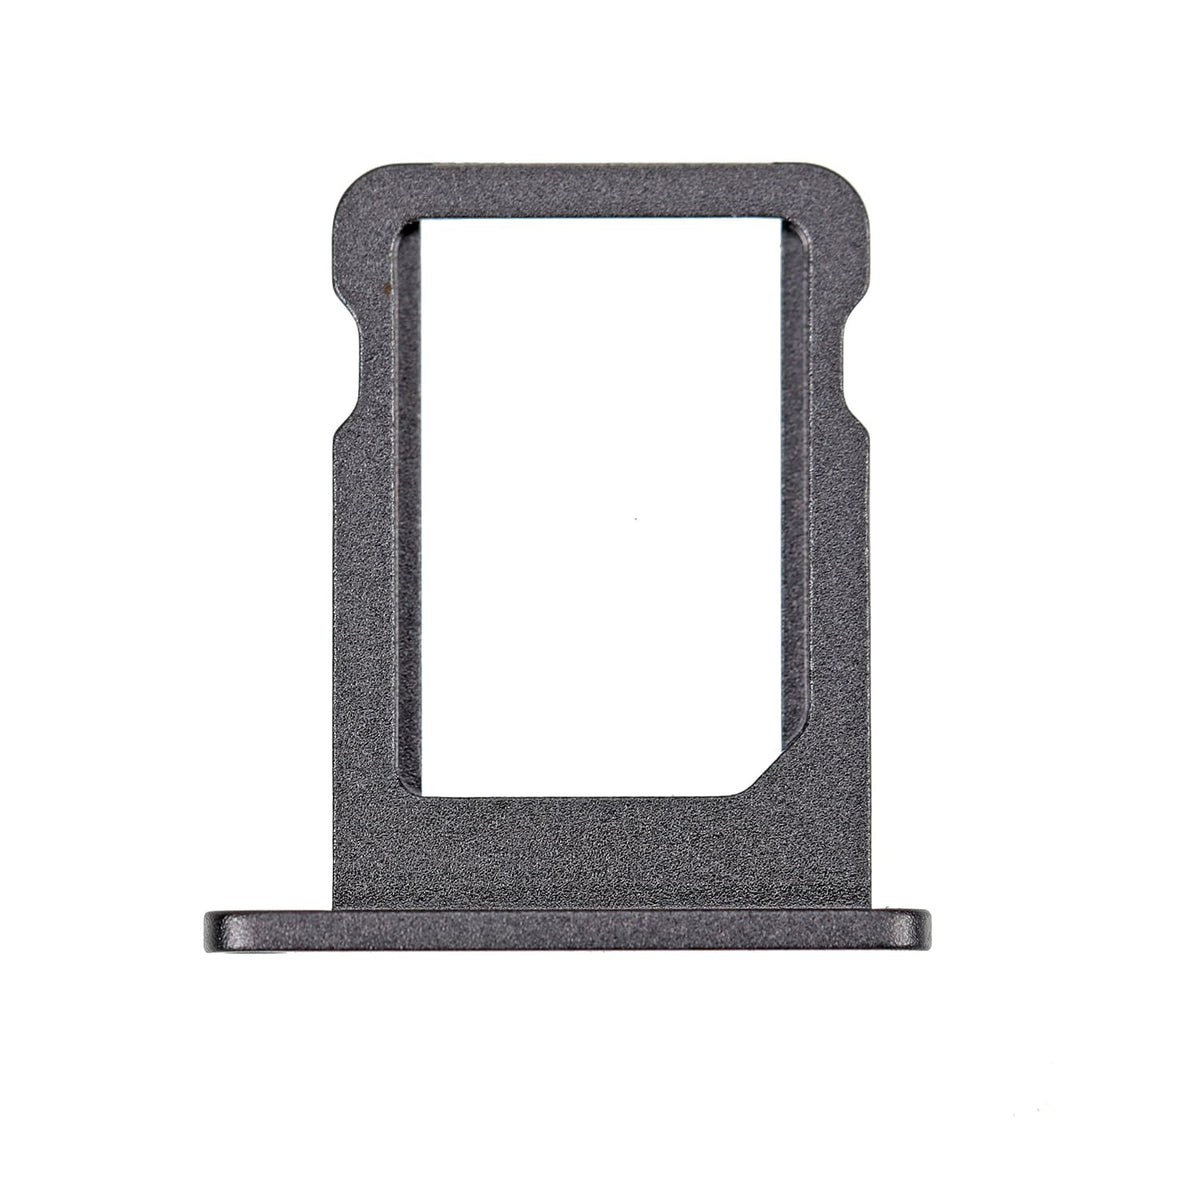 SIM CARD TRAY FOR FOR IPAD PRO 12.9 5TH (GRAY)